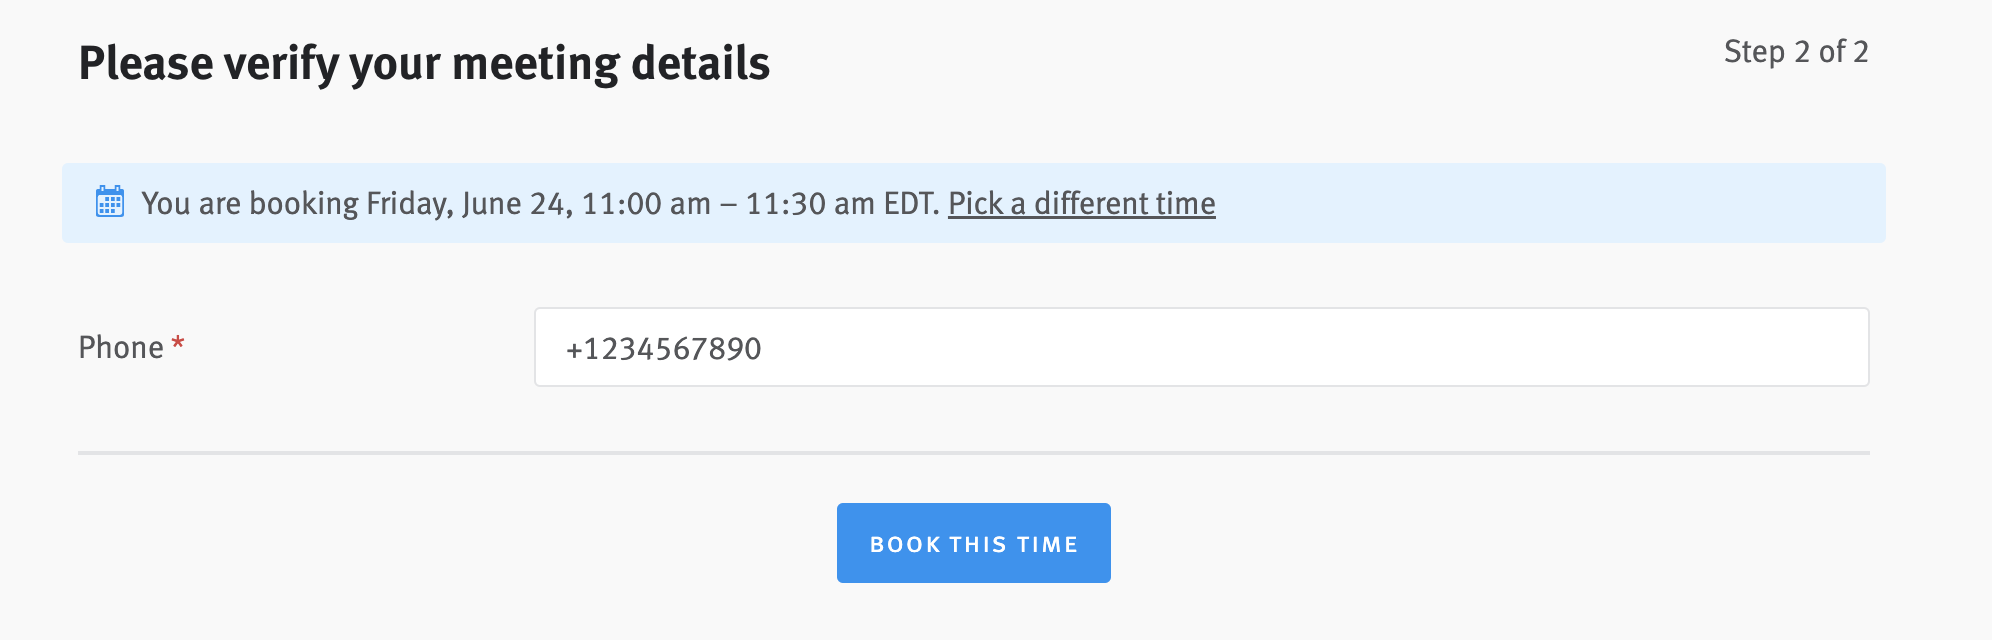 Meeting details verification page shown to a candidate after they have selected an available time slot.